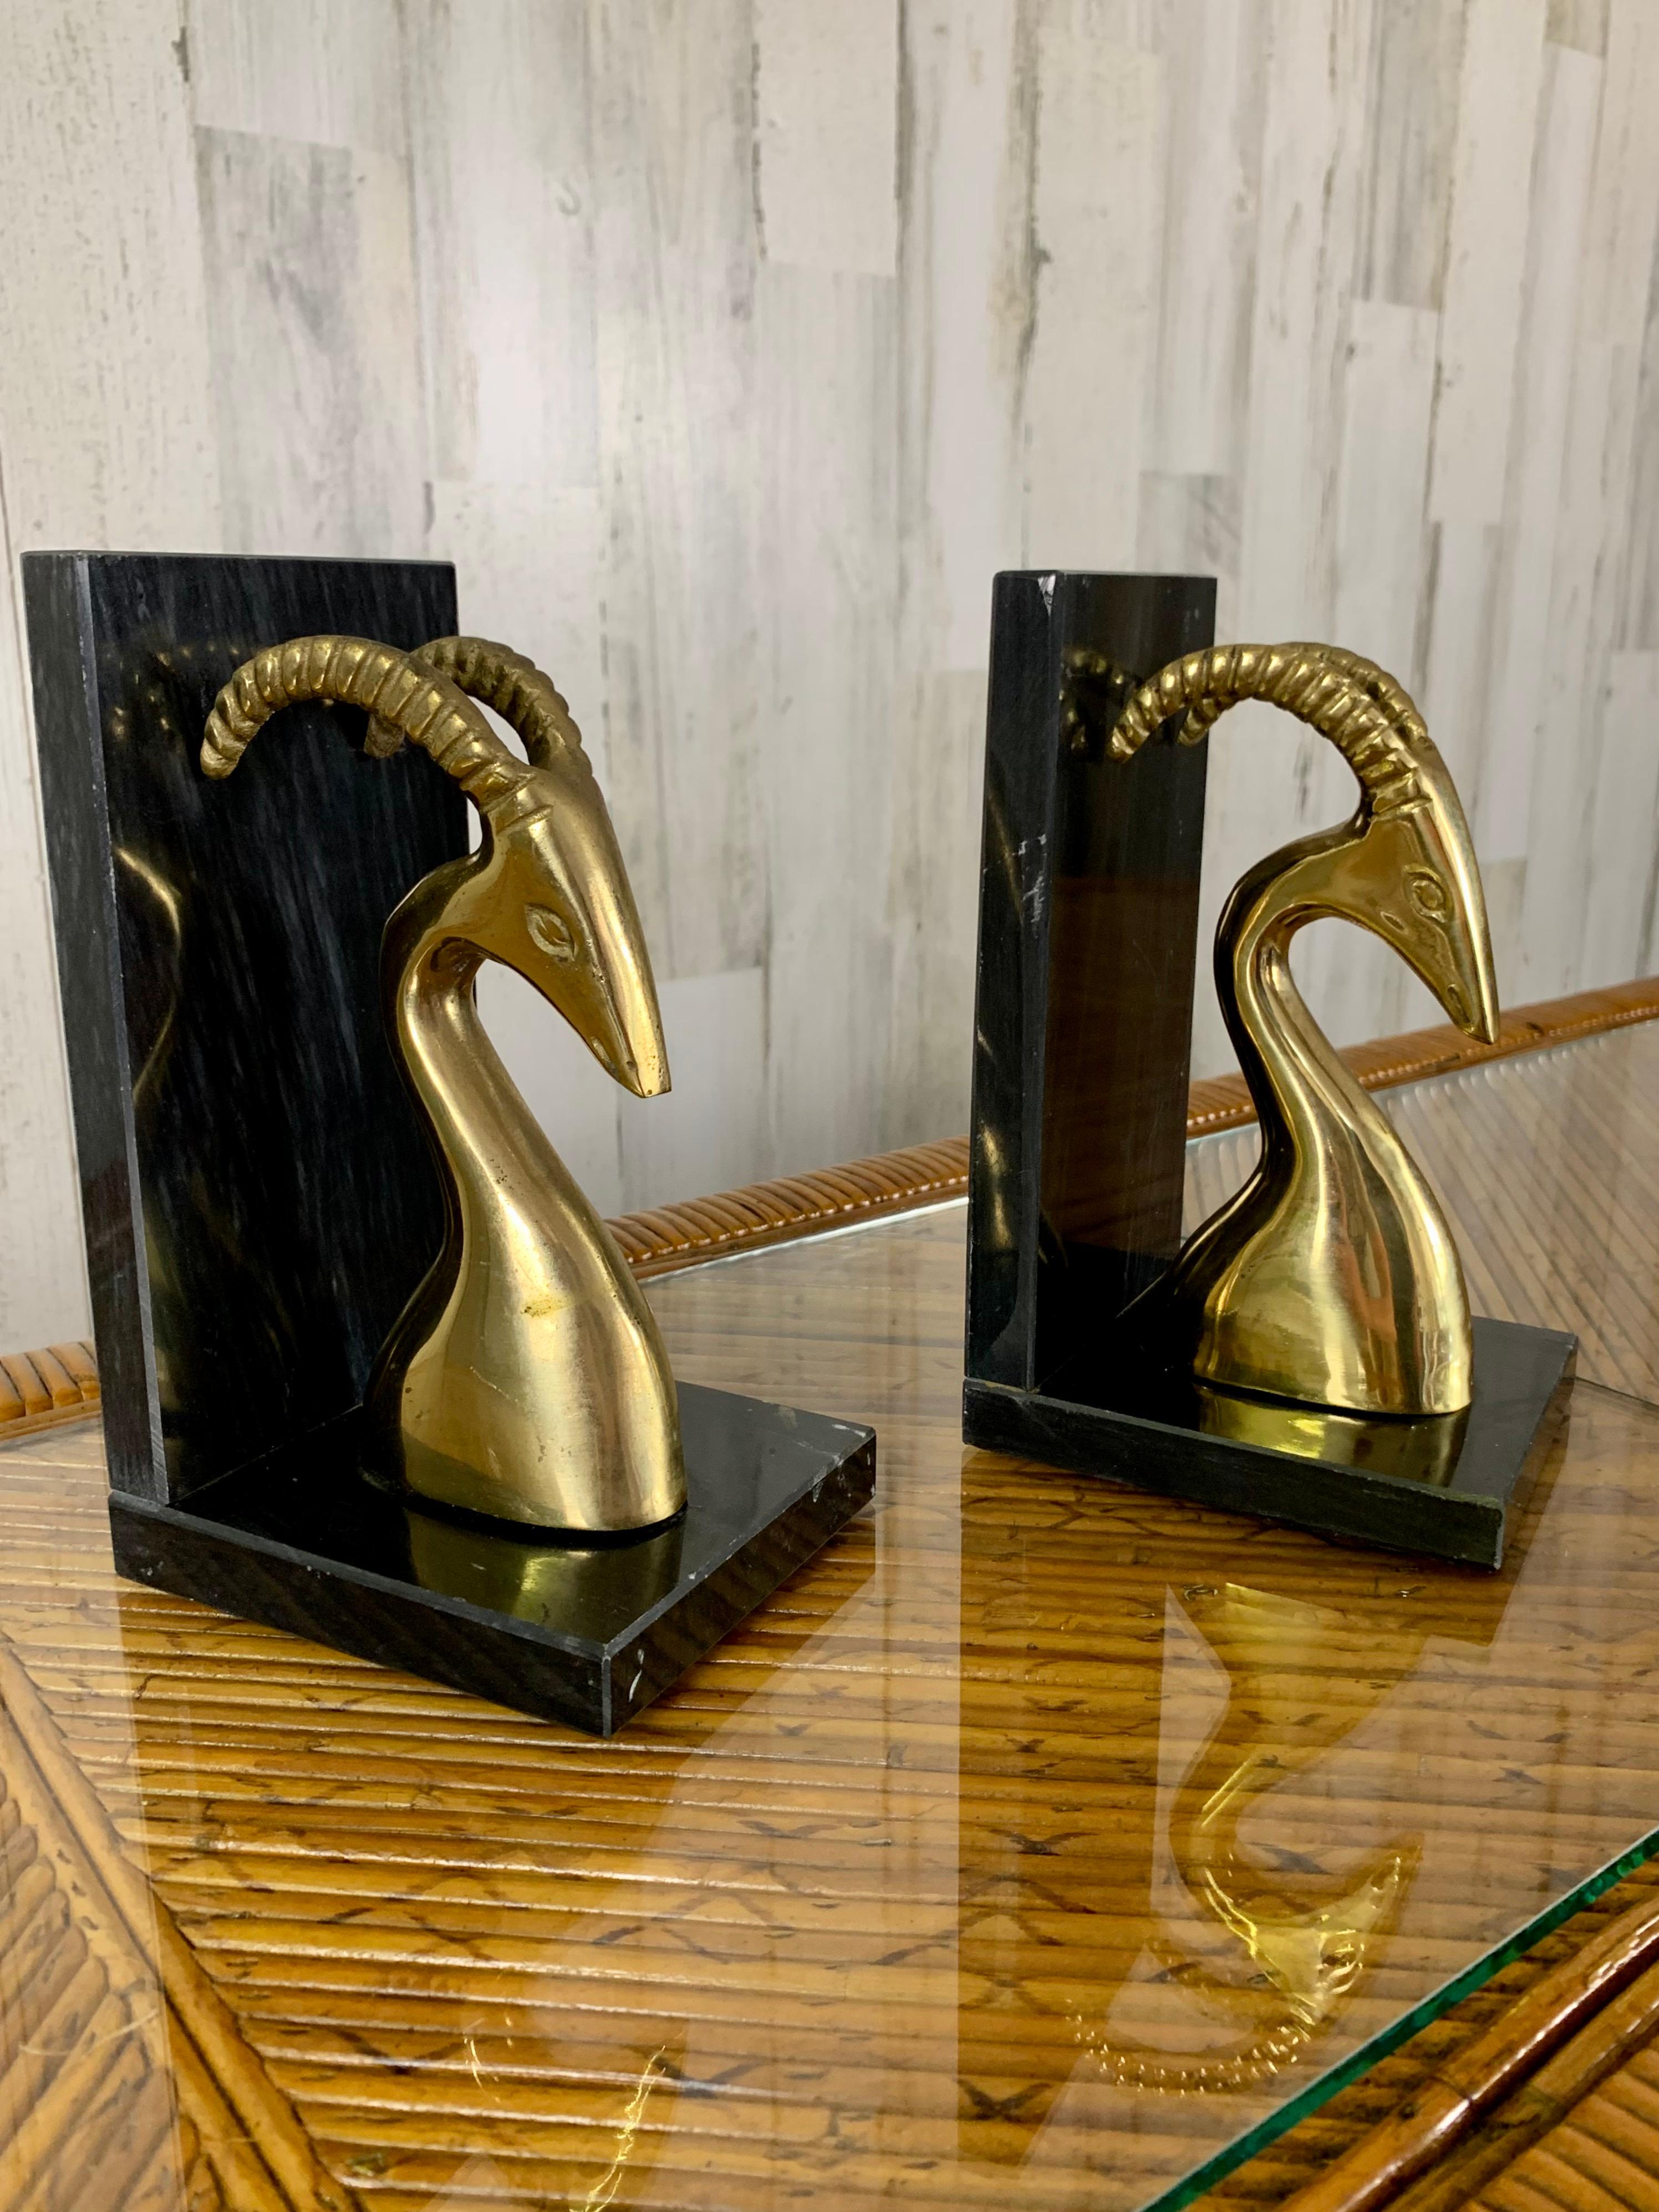 Pair of brass gazelle sculptures mounted on black marble stands.